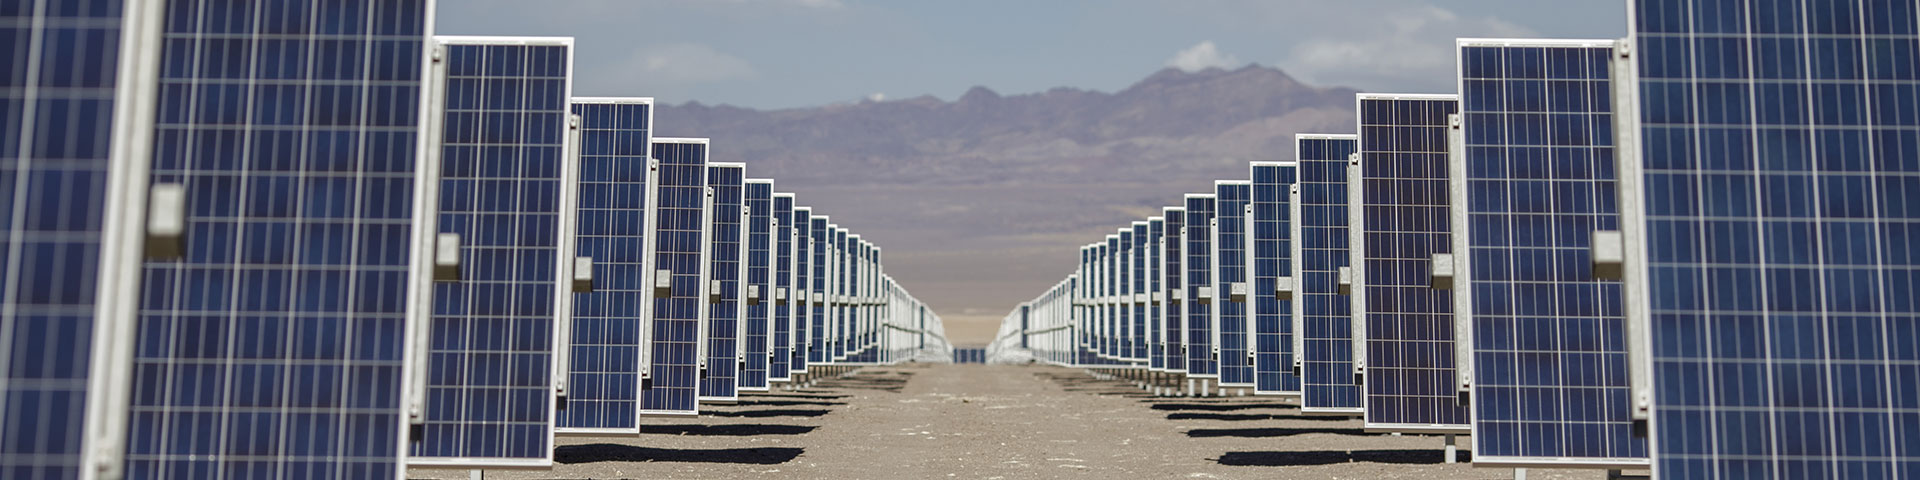 Solar panels lined up in a desert area, harnessing the sun's energy to generate electricity efficiently.